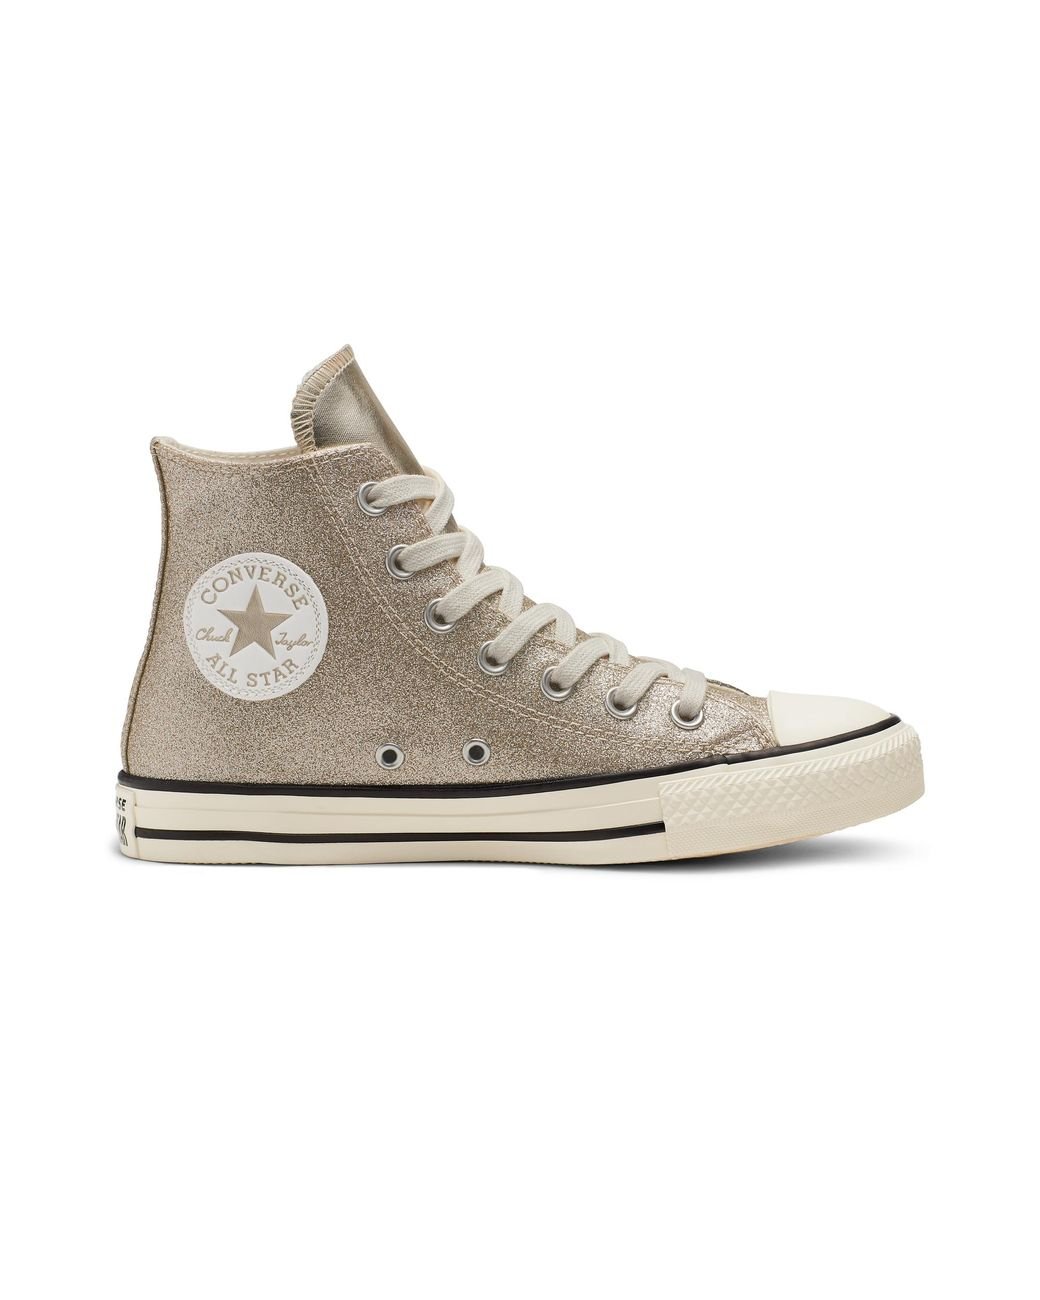 Converse Chuck Taylor All Star Shiny Metal High Top in Metallic | Lyst